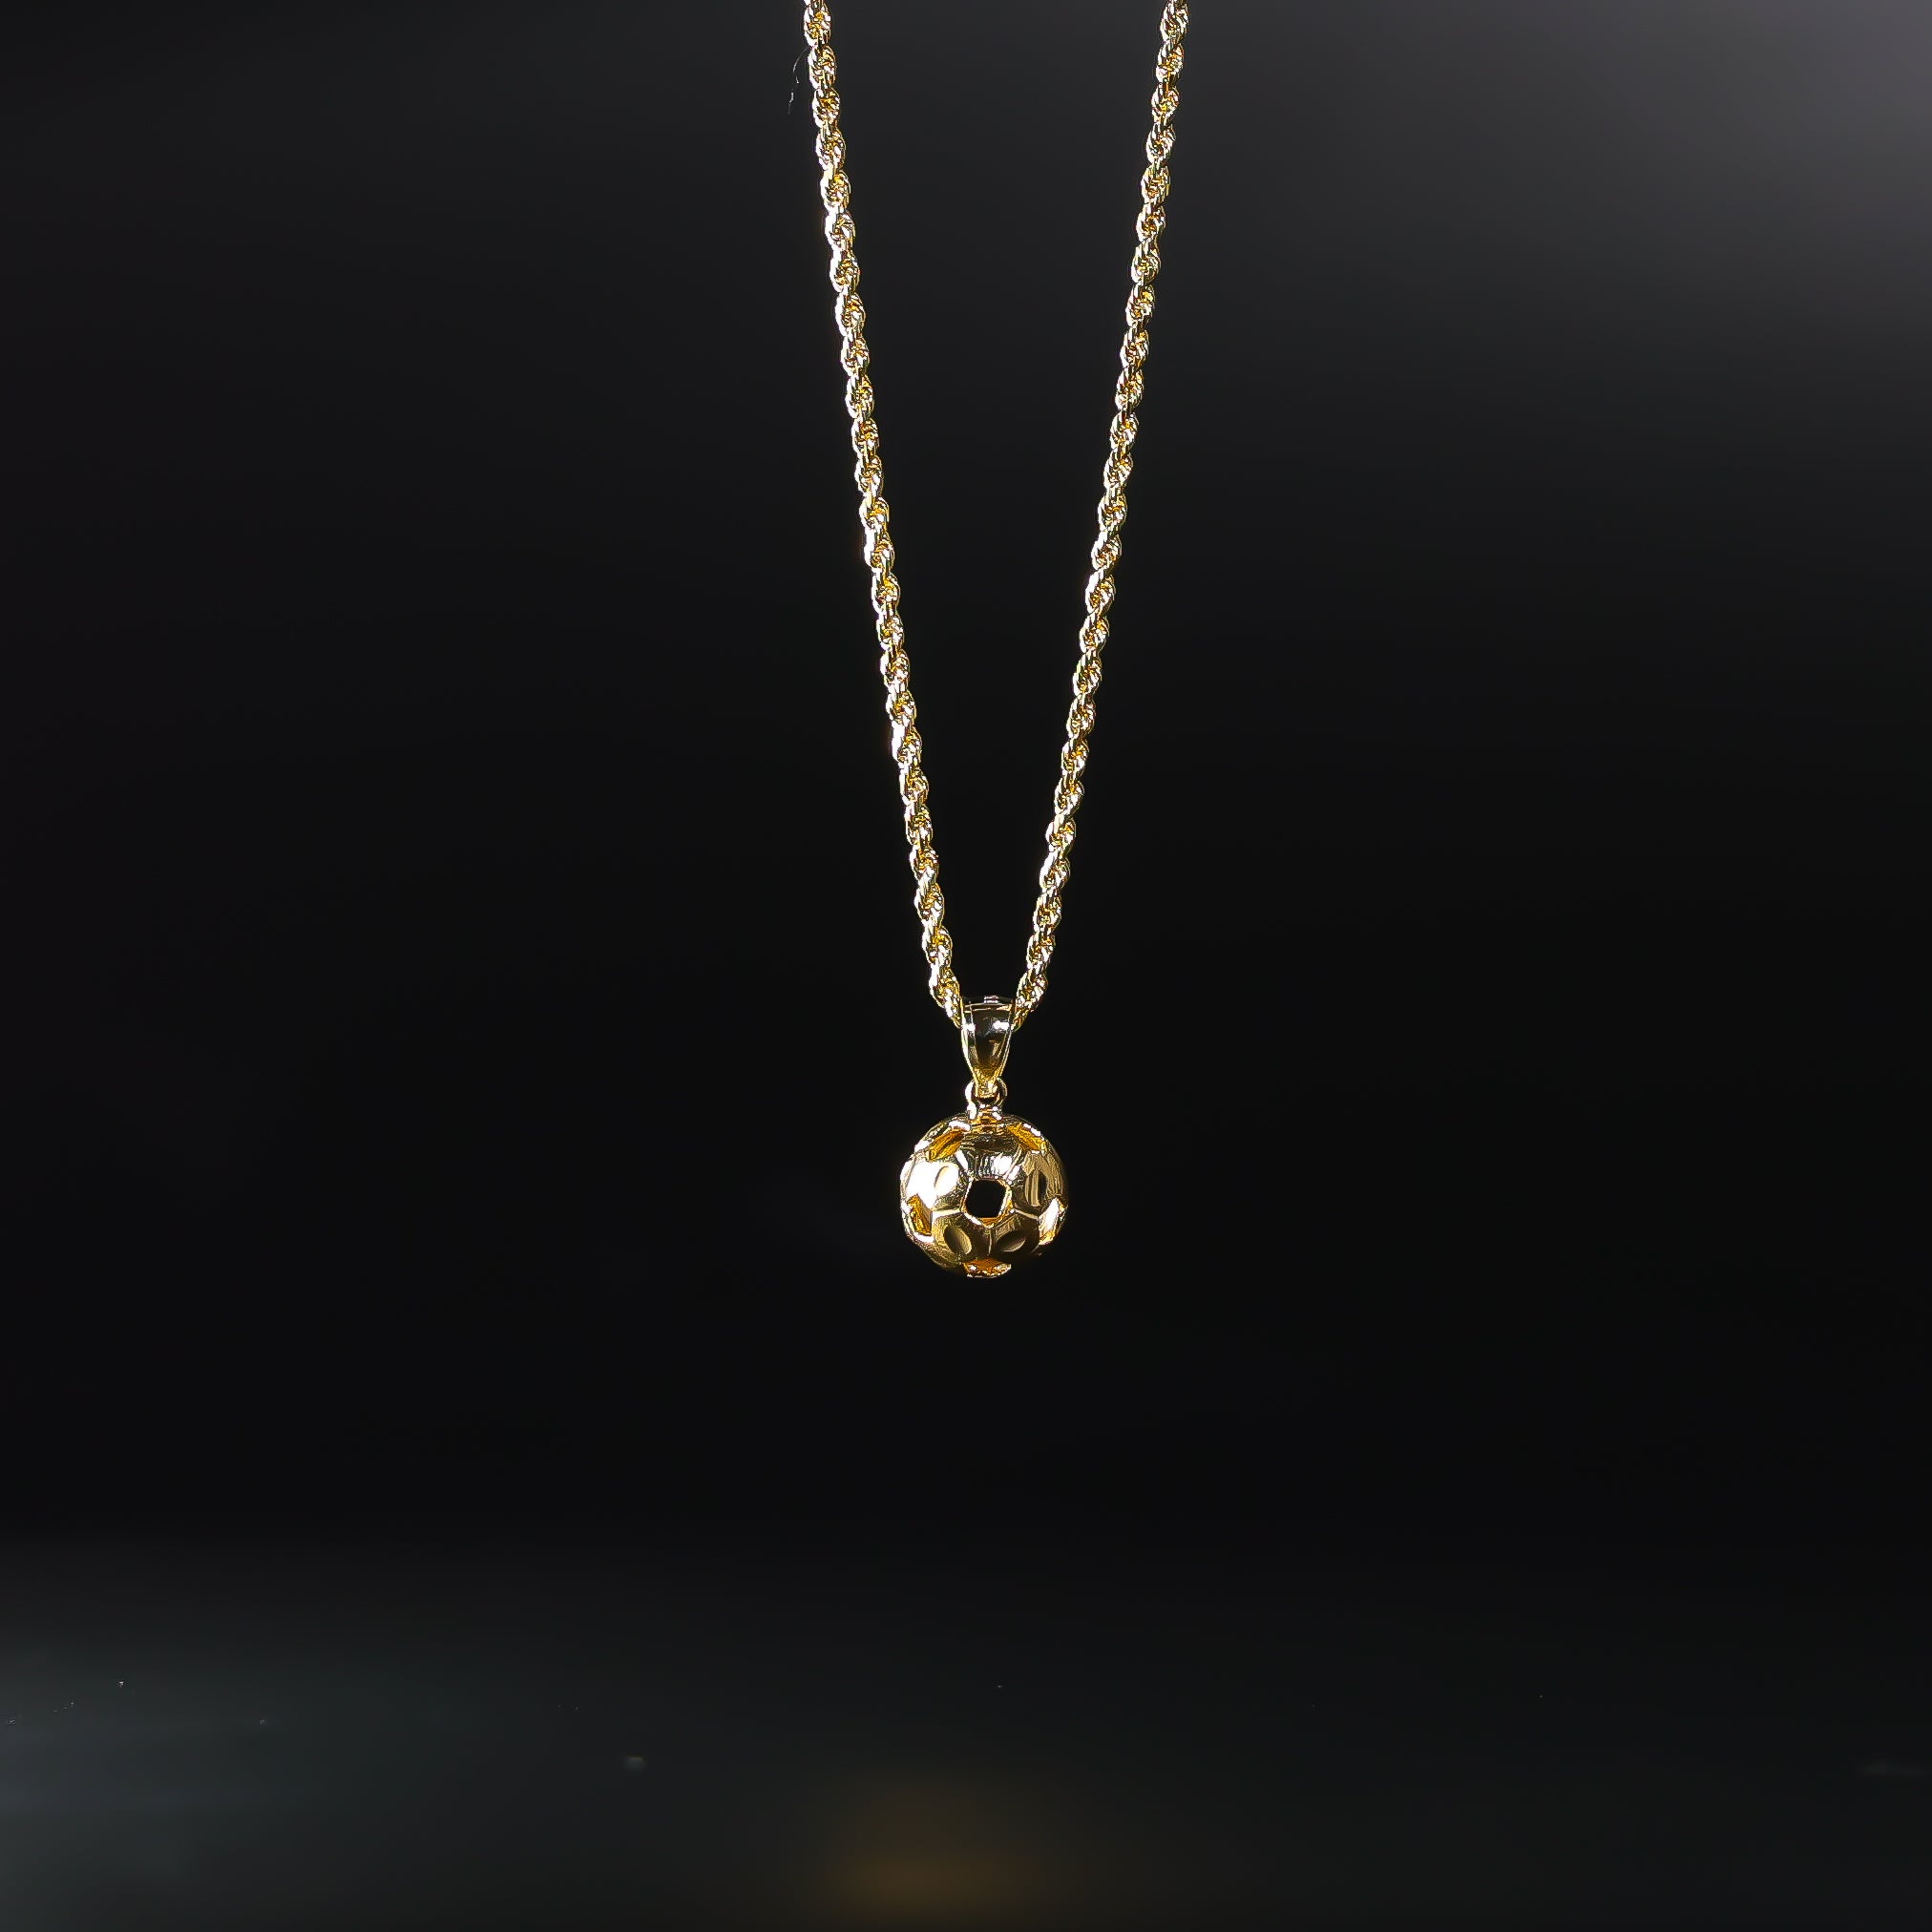 Gold Soccer Ball Pendant Model-1984 - Charlie & Co. Jewelry